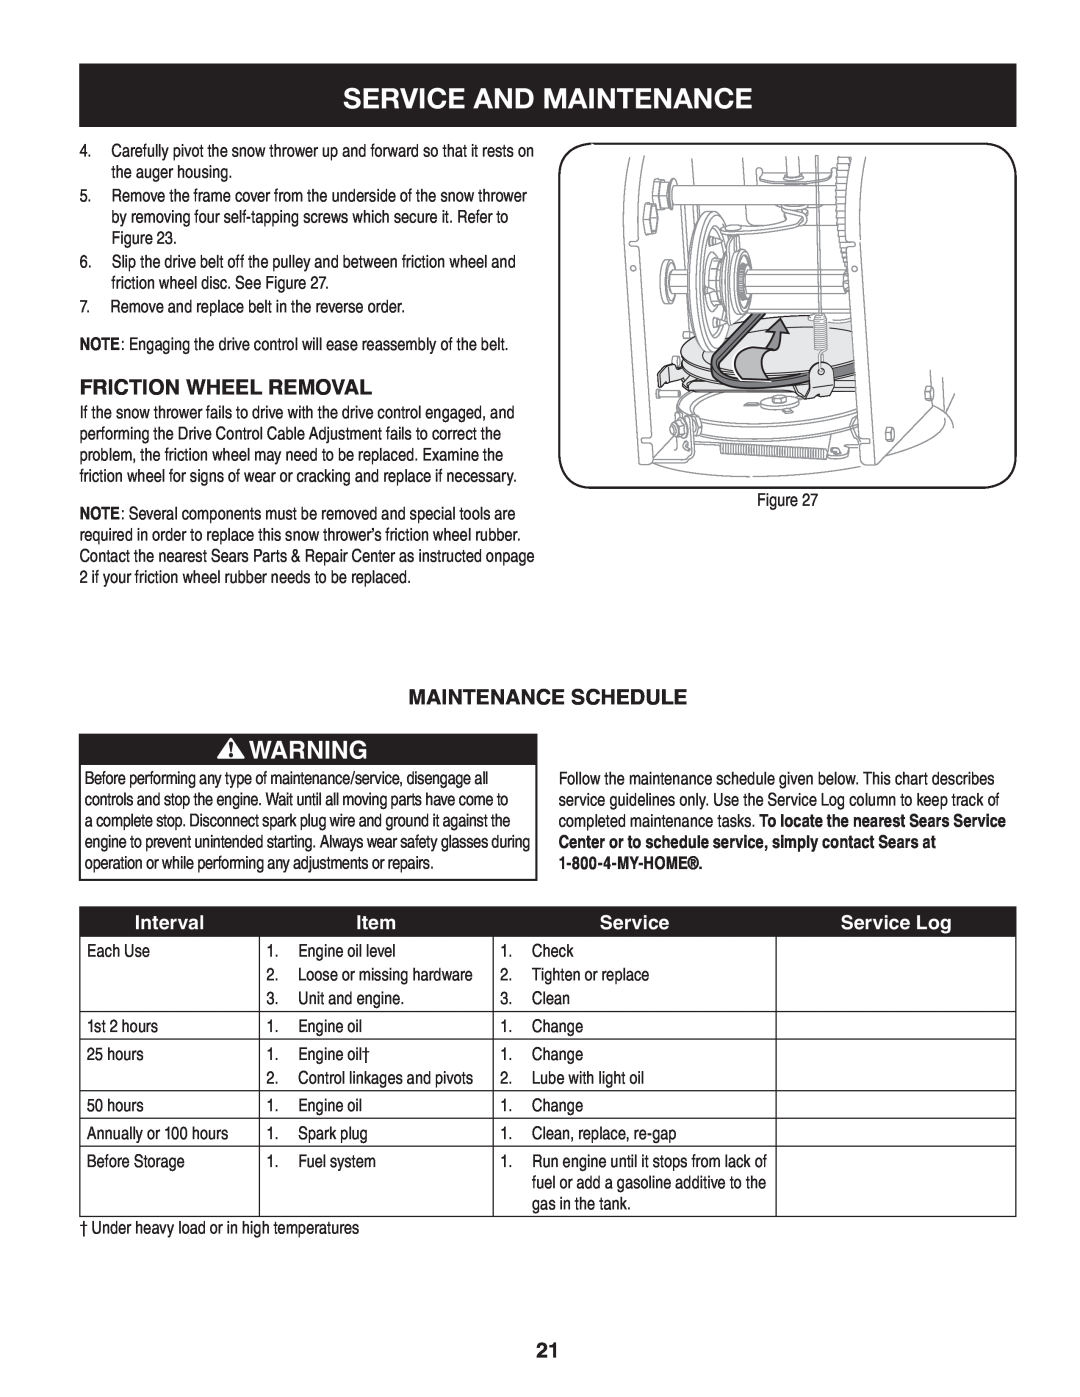 Sears 247.8879 Service And Maintenance, Friction Wheel Removal, Maintenance Schedule, Interval, Service Log 